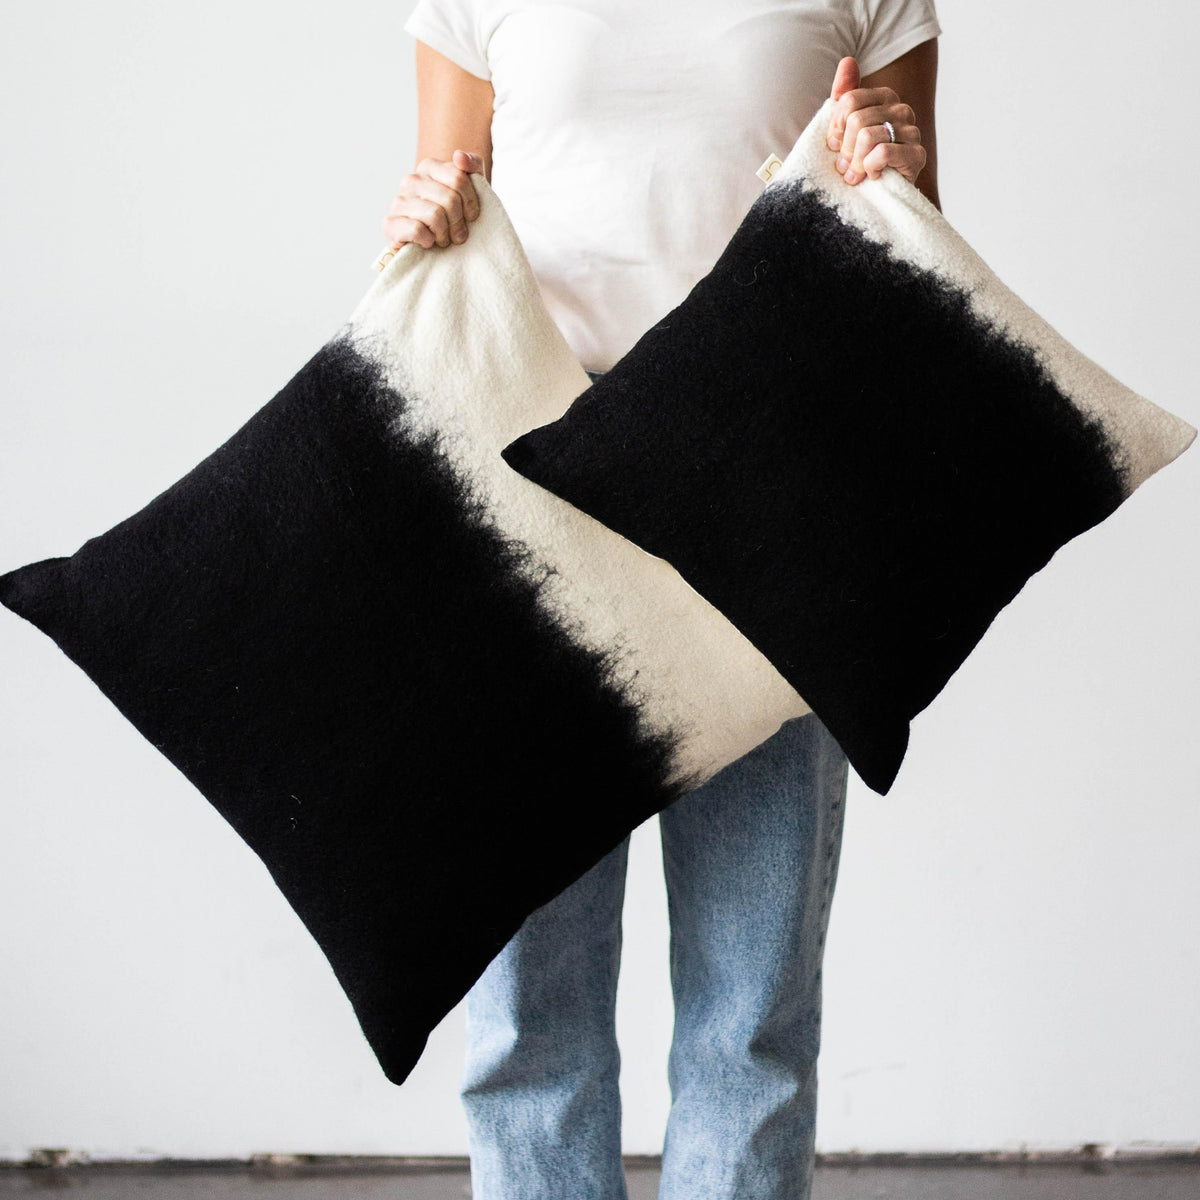 Eclipse Hand Felted Pillow kanju interiors African décor handmade natural organic color accent pillow cushion throw decorative lounge comfortable comfy unique modern contemporary stylish soft accent durable minimal couch chair bed luxury hand made home good gift hand felted felt merino wool mohair yarn hand dyed felting black white